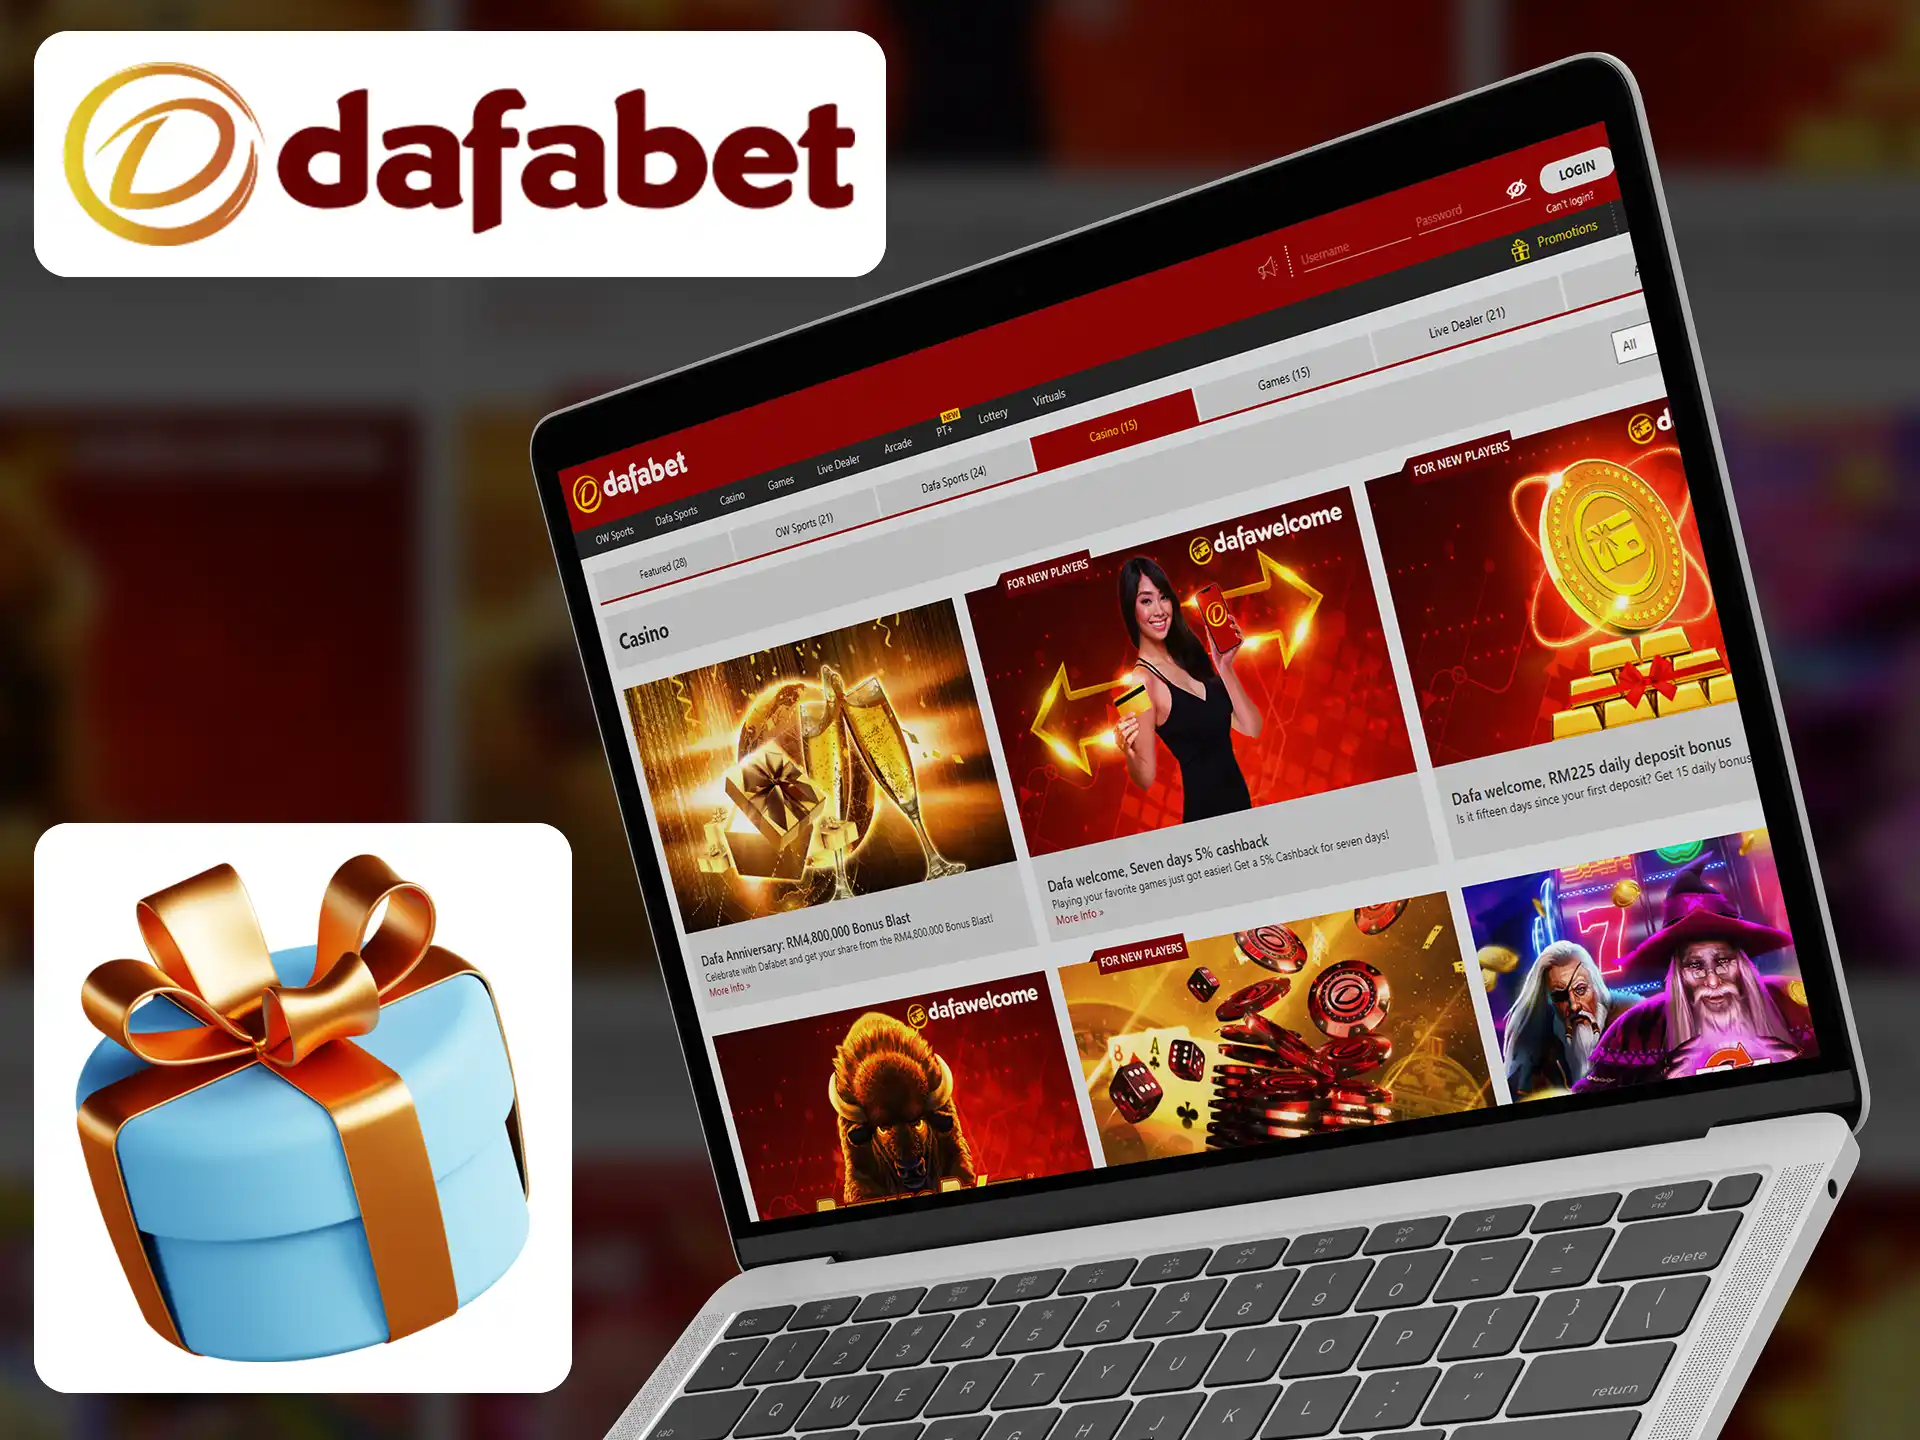 Dafabet give you a welcome bonus after first visit of main page.